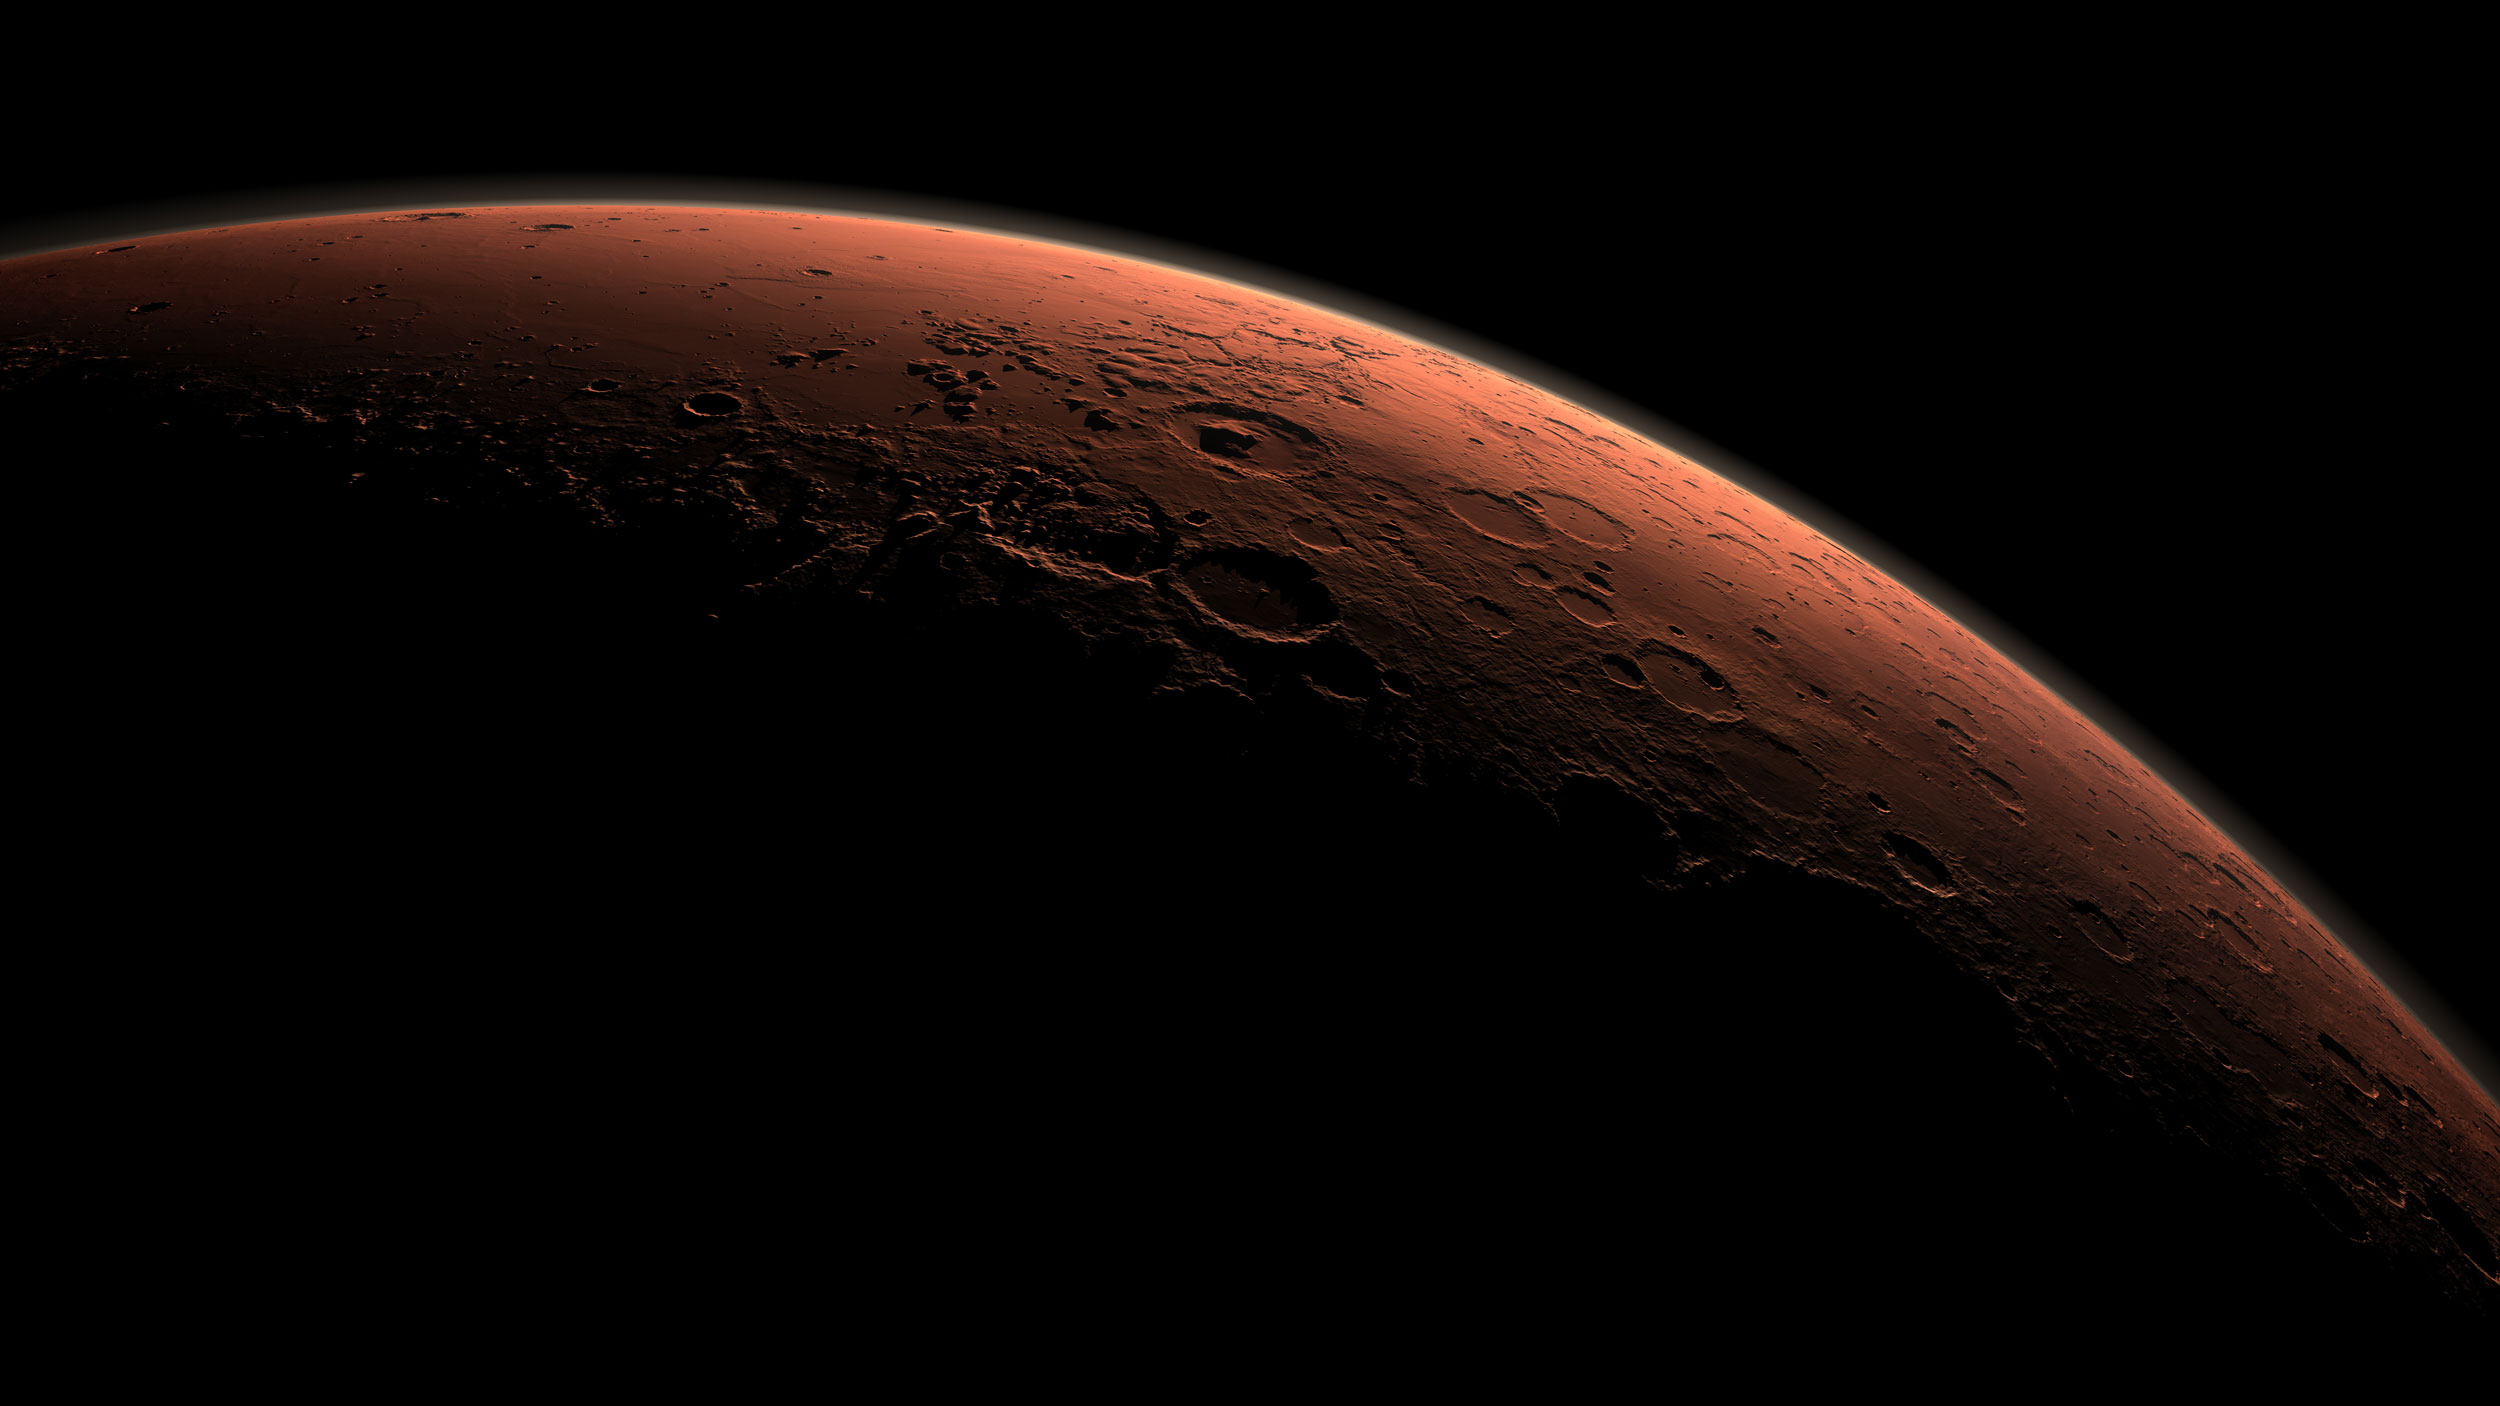 Mars and its missing atmosphere